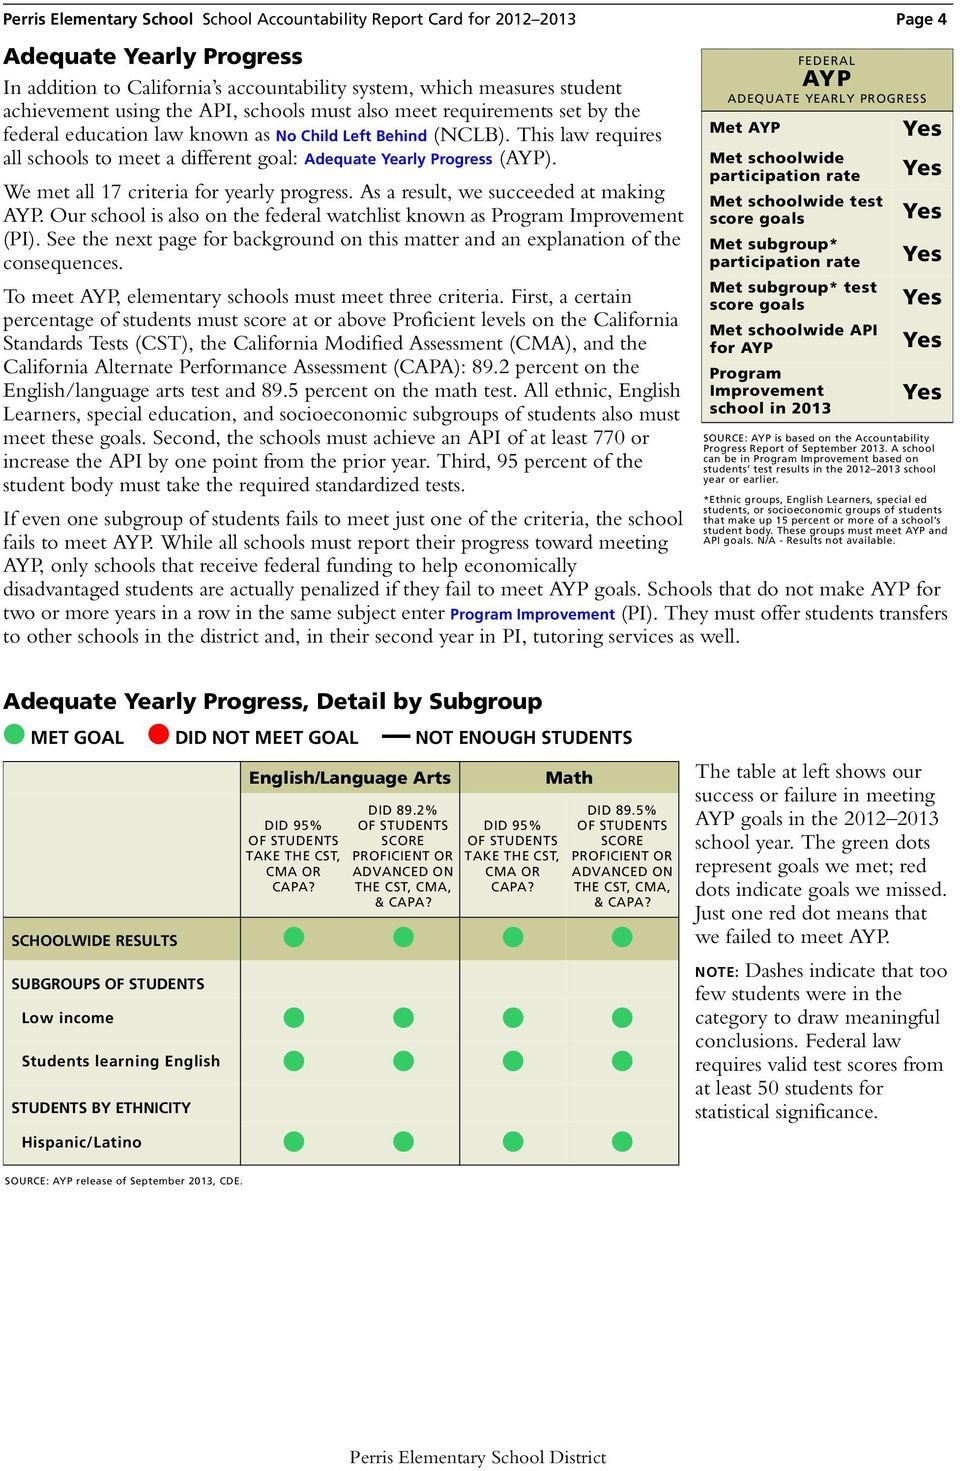 As a result, we succeeded at making AYP. Our school is also on the federal watchlist known as Program Improvement (PI).